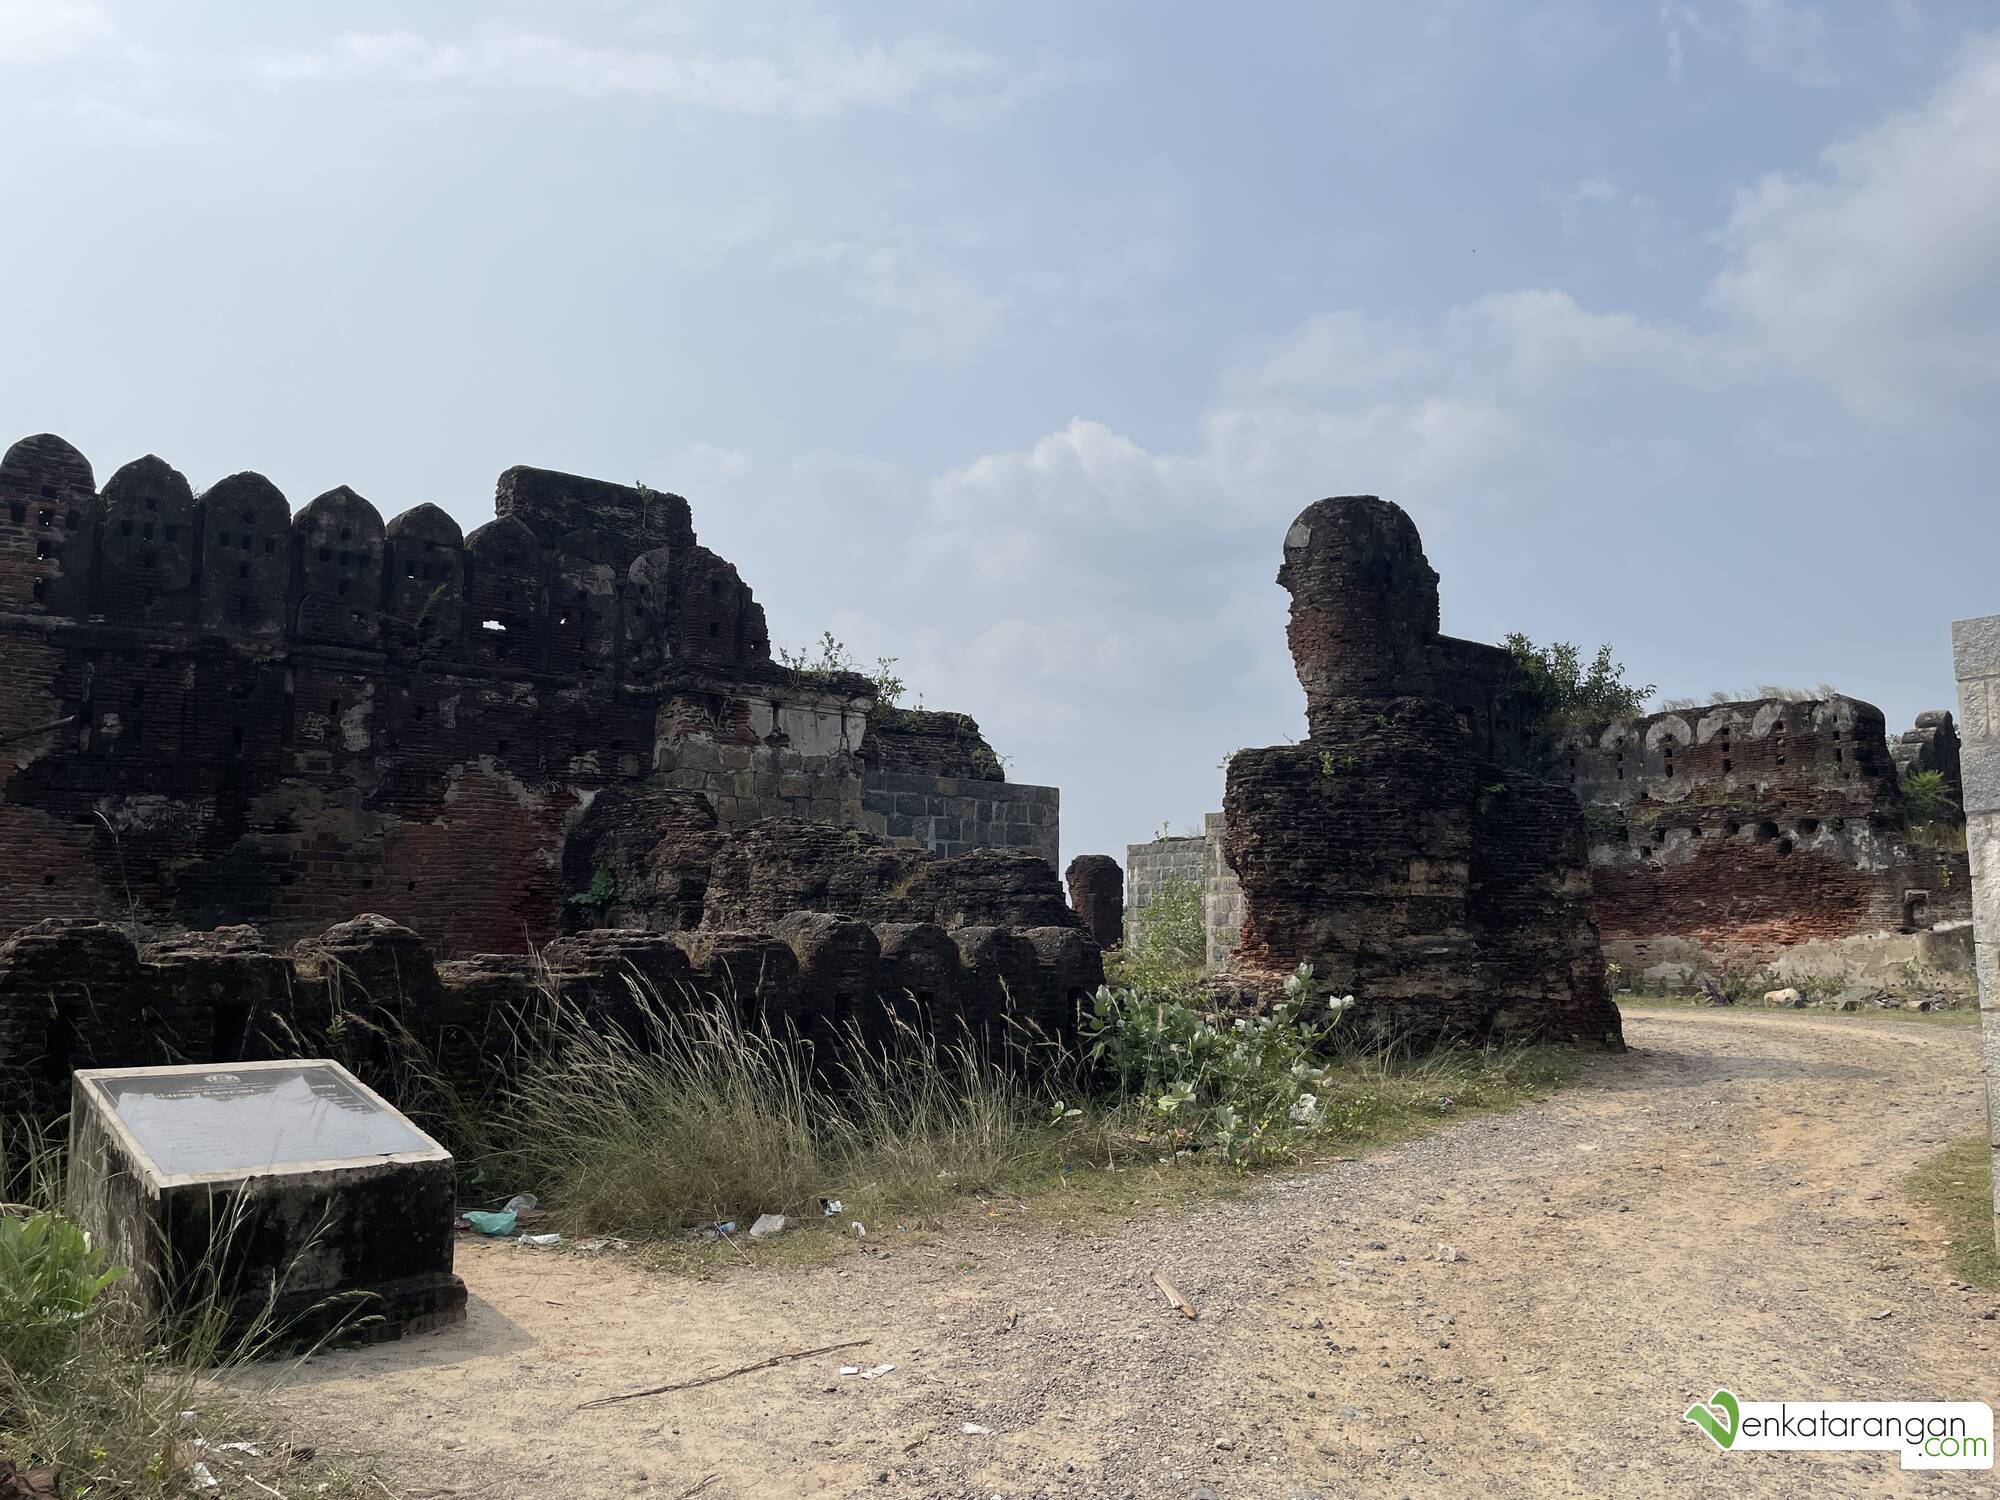 The ruined walls of Alamparai Fort